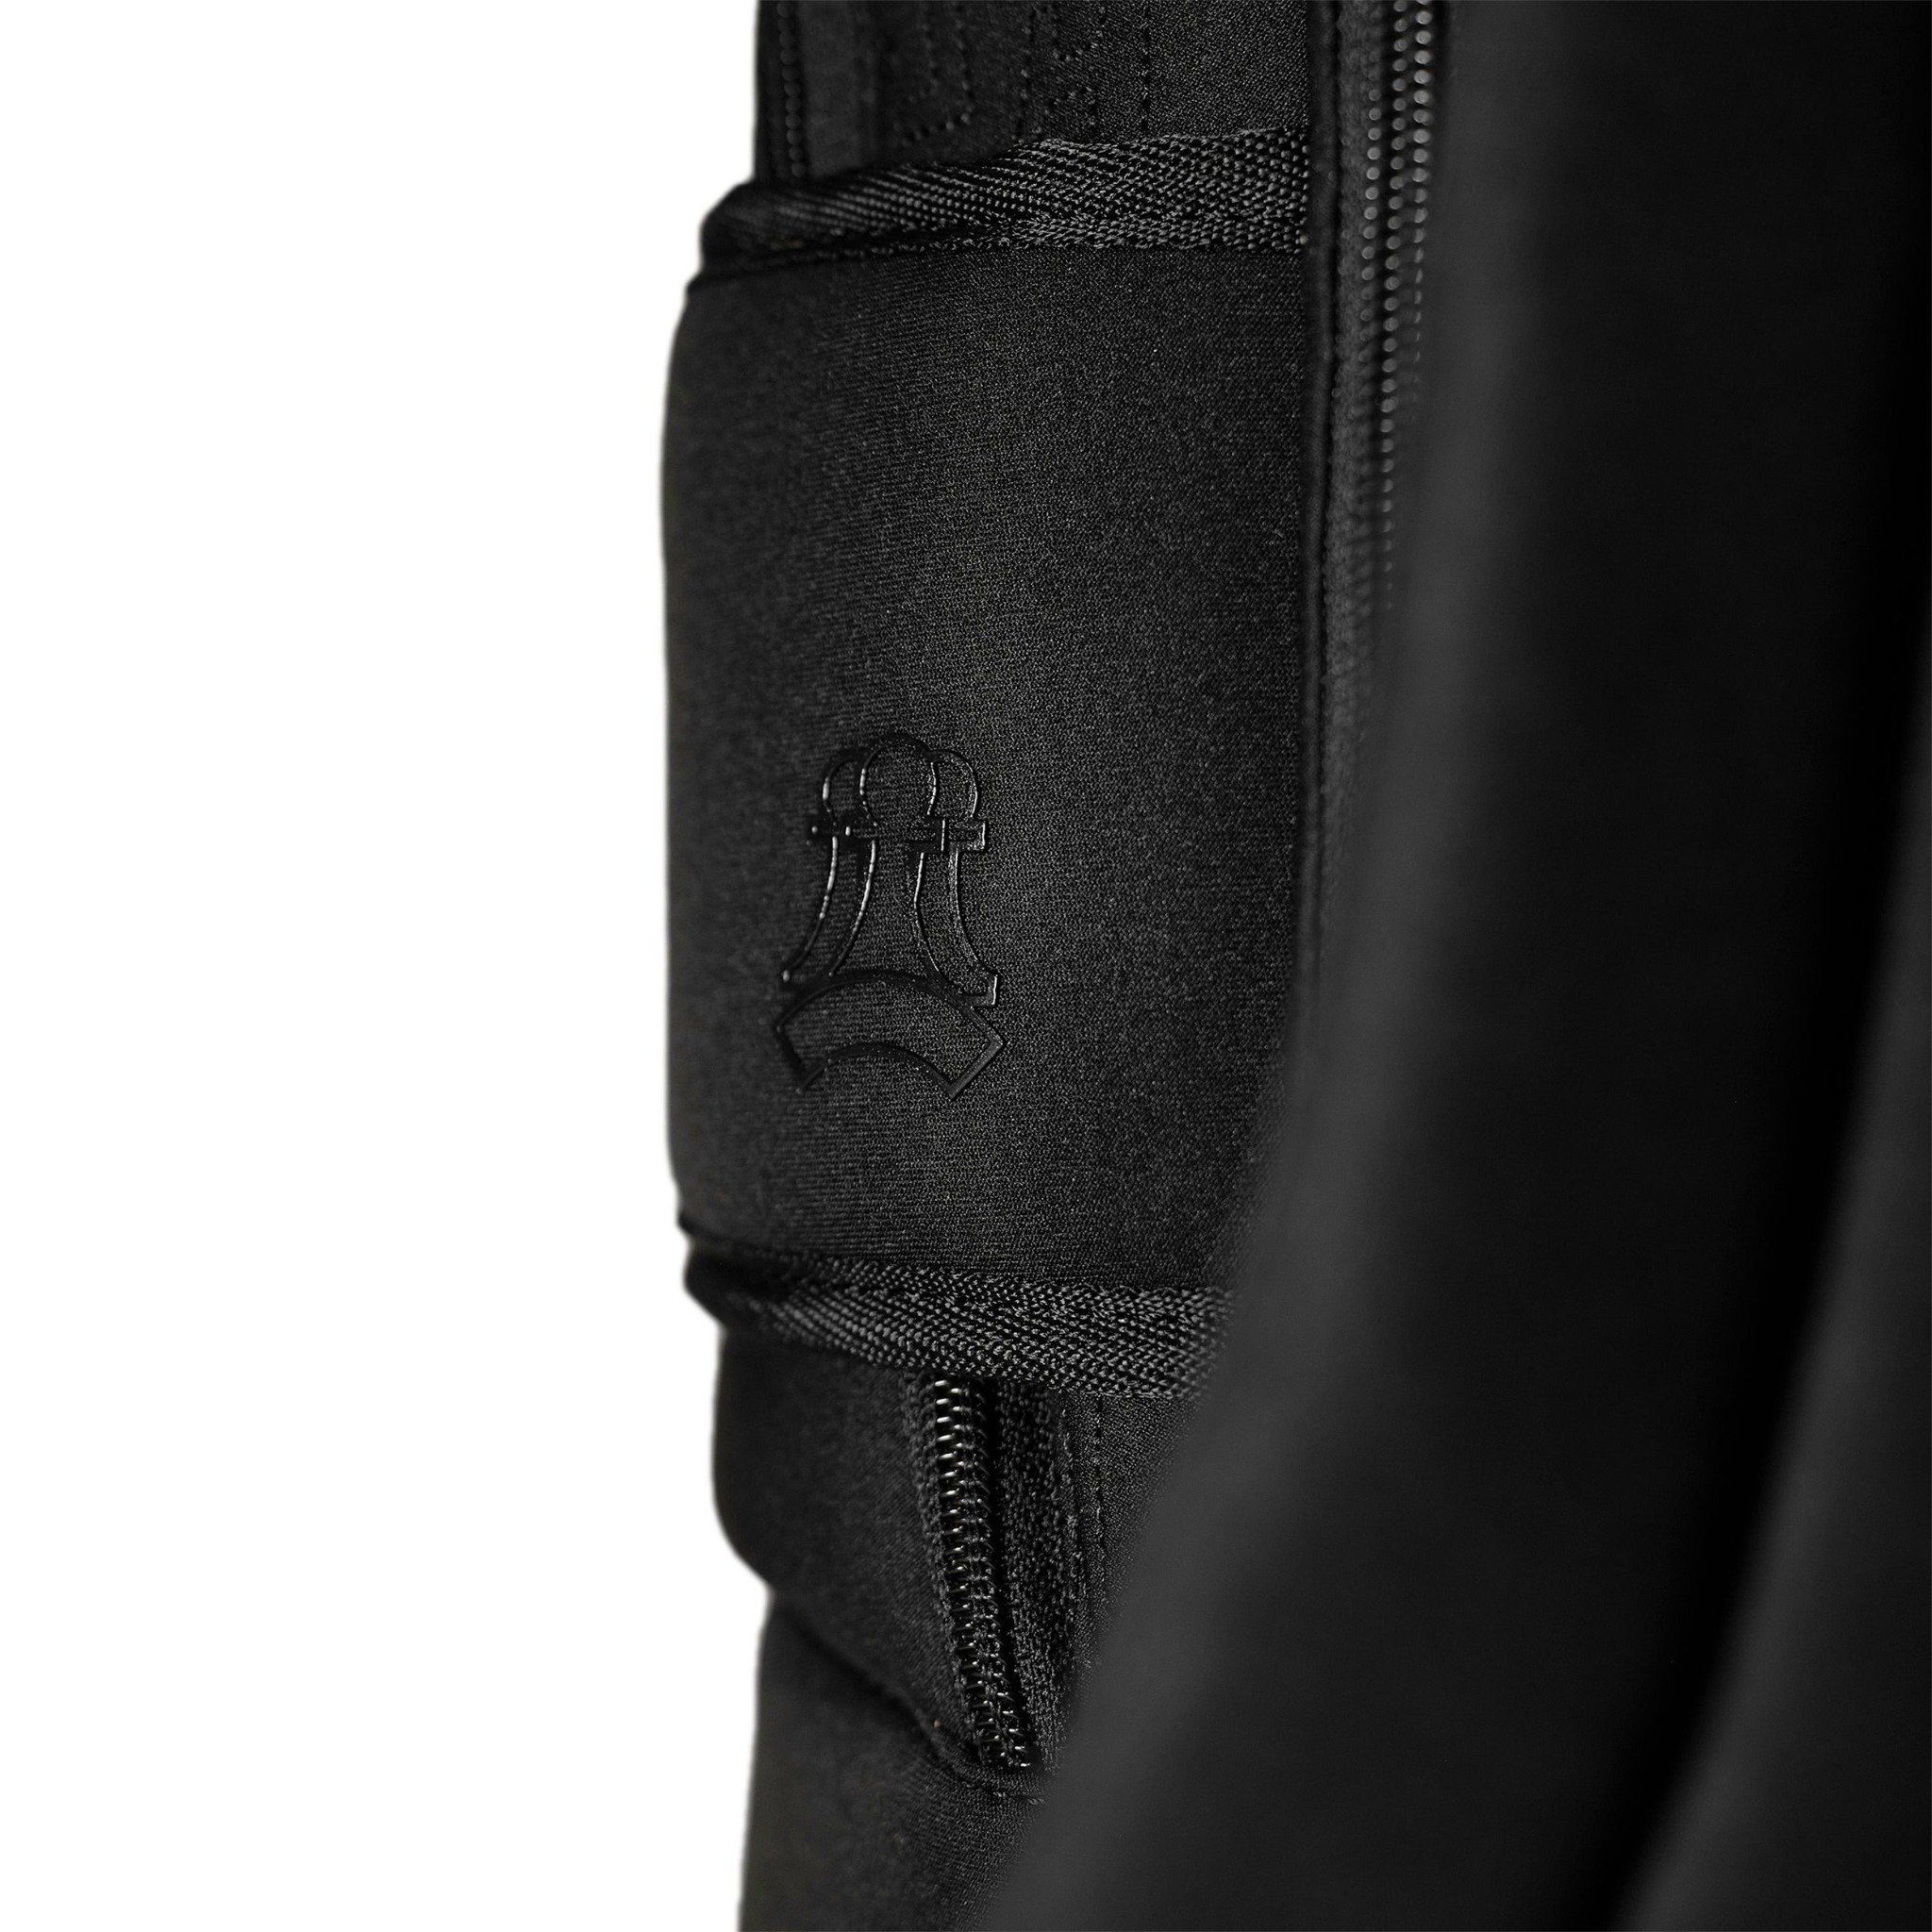  FRONT Queening The Pawn Backpack SB22 - BLACK - M 